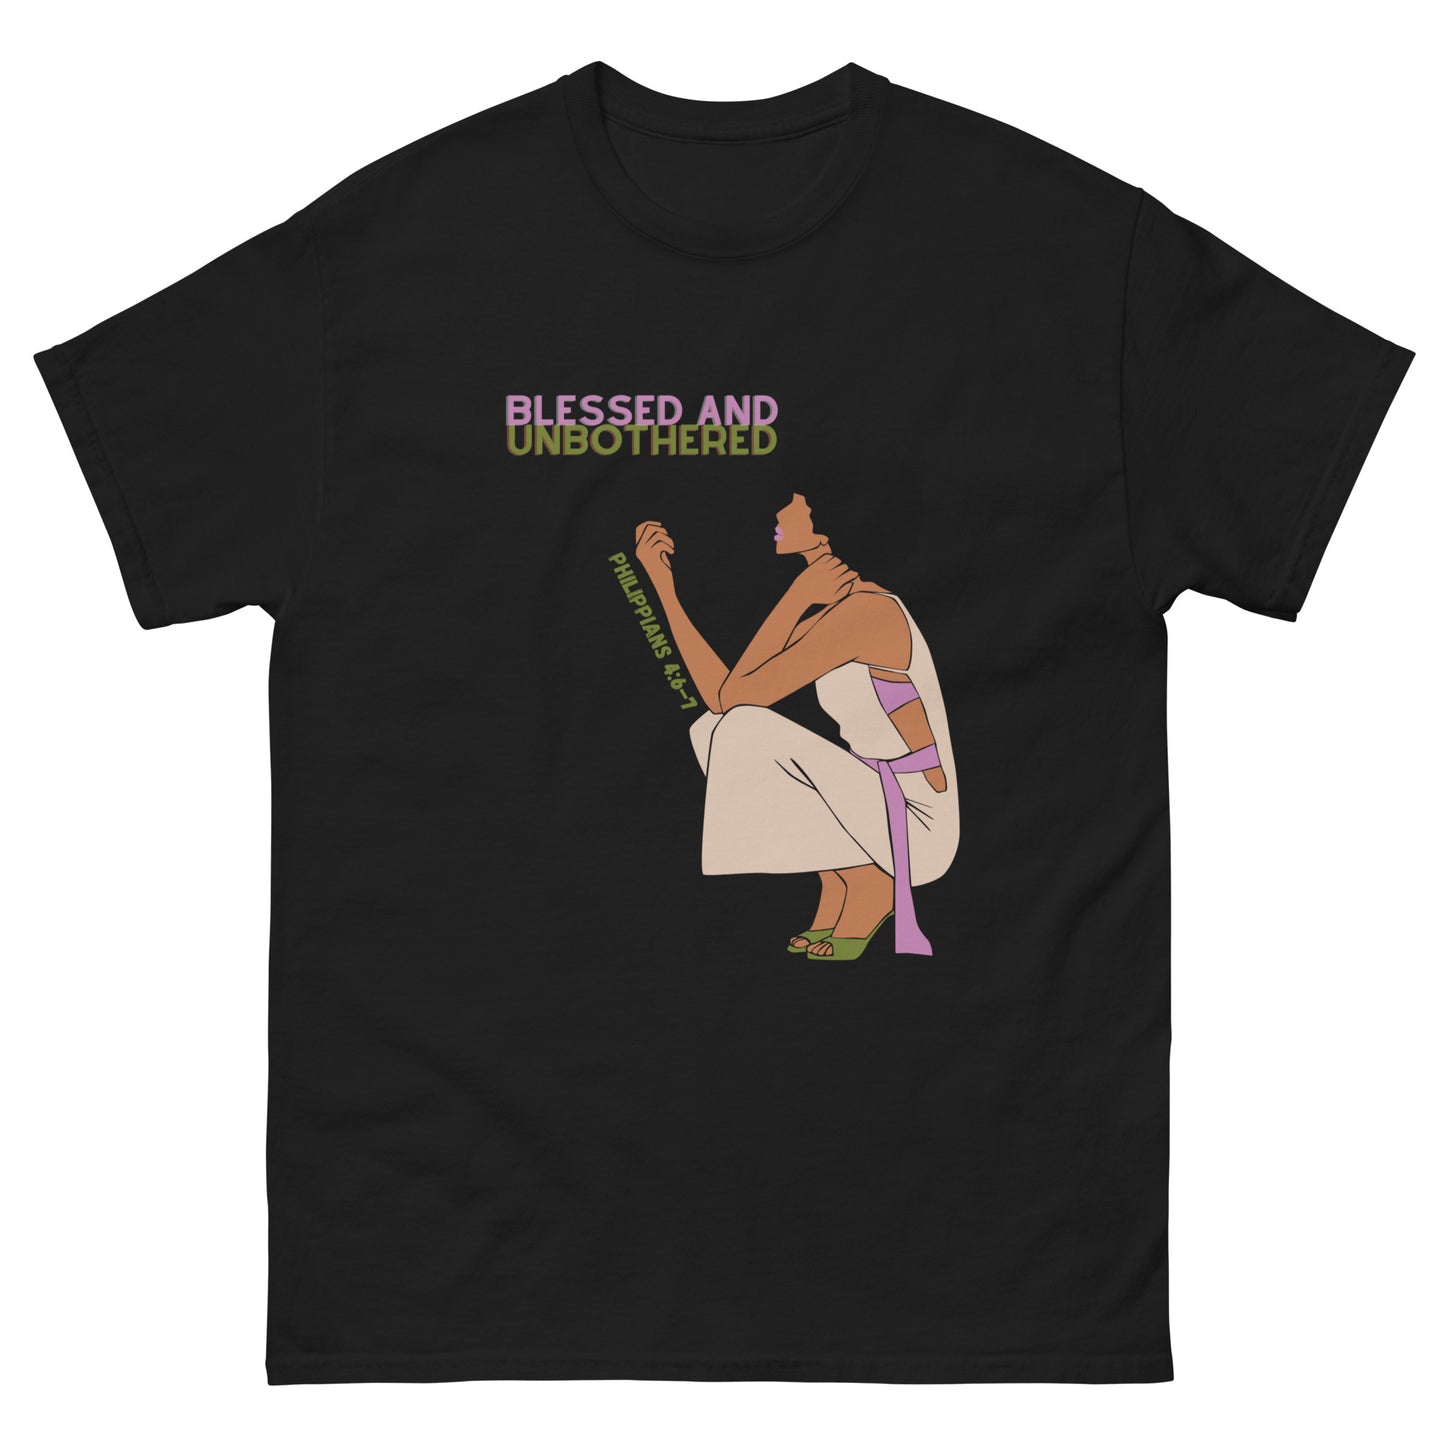 BLESSED & UNBOTHERED Adult T-SHIRT